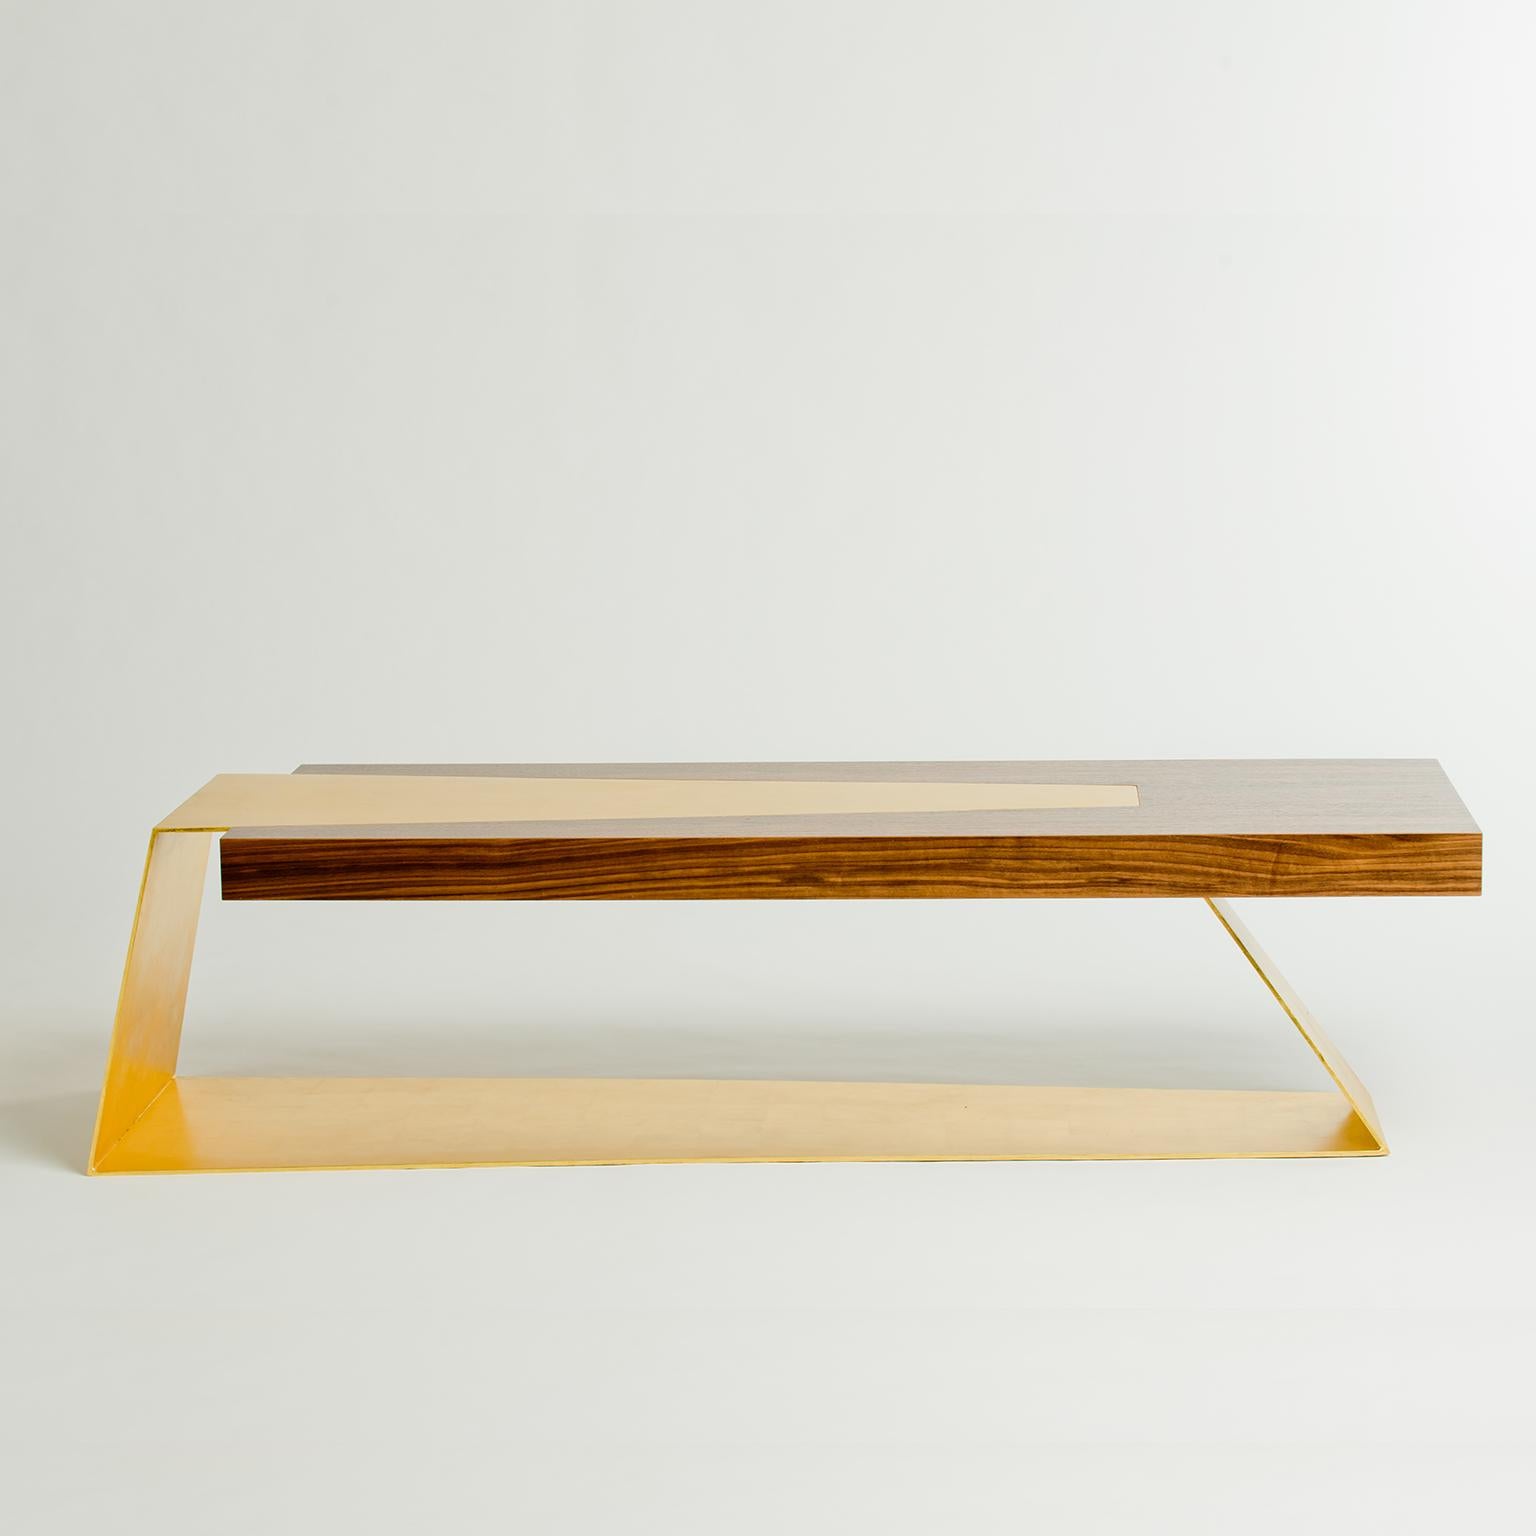 The Bowery bench endeavors to explore how the structural elements of the bench can become unique aesthetic elements. The metal and wood do not simply exist together within this piece of furniture, but instead they react to and compliment one